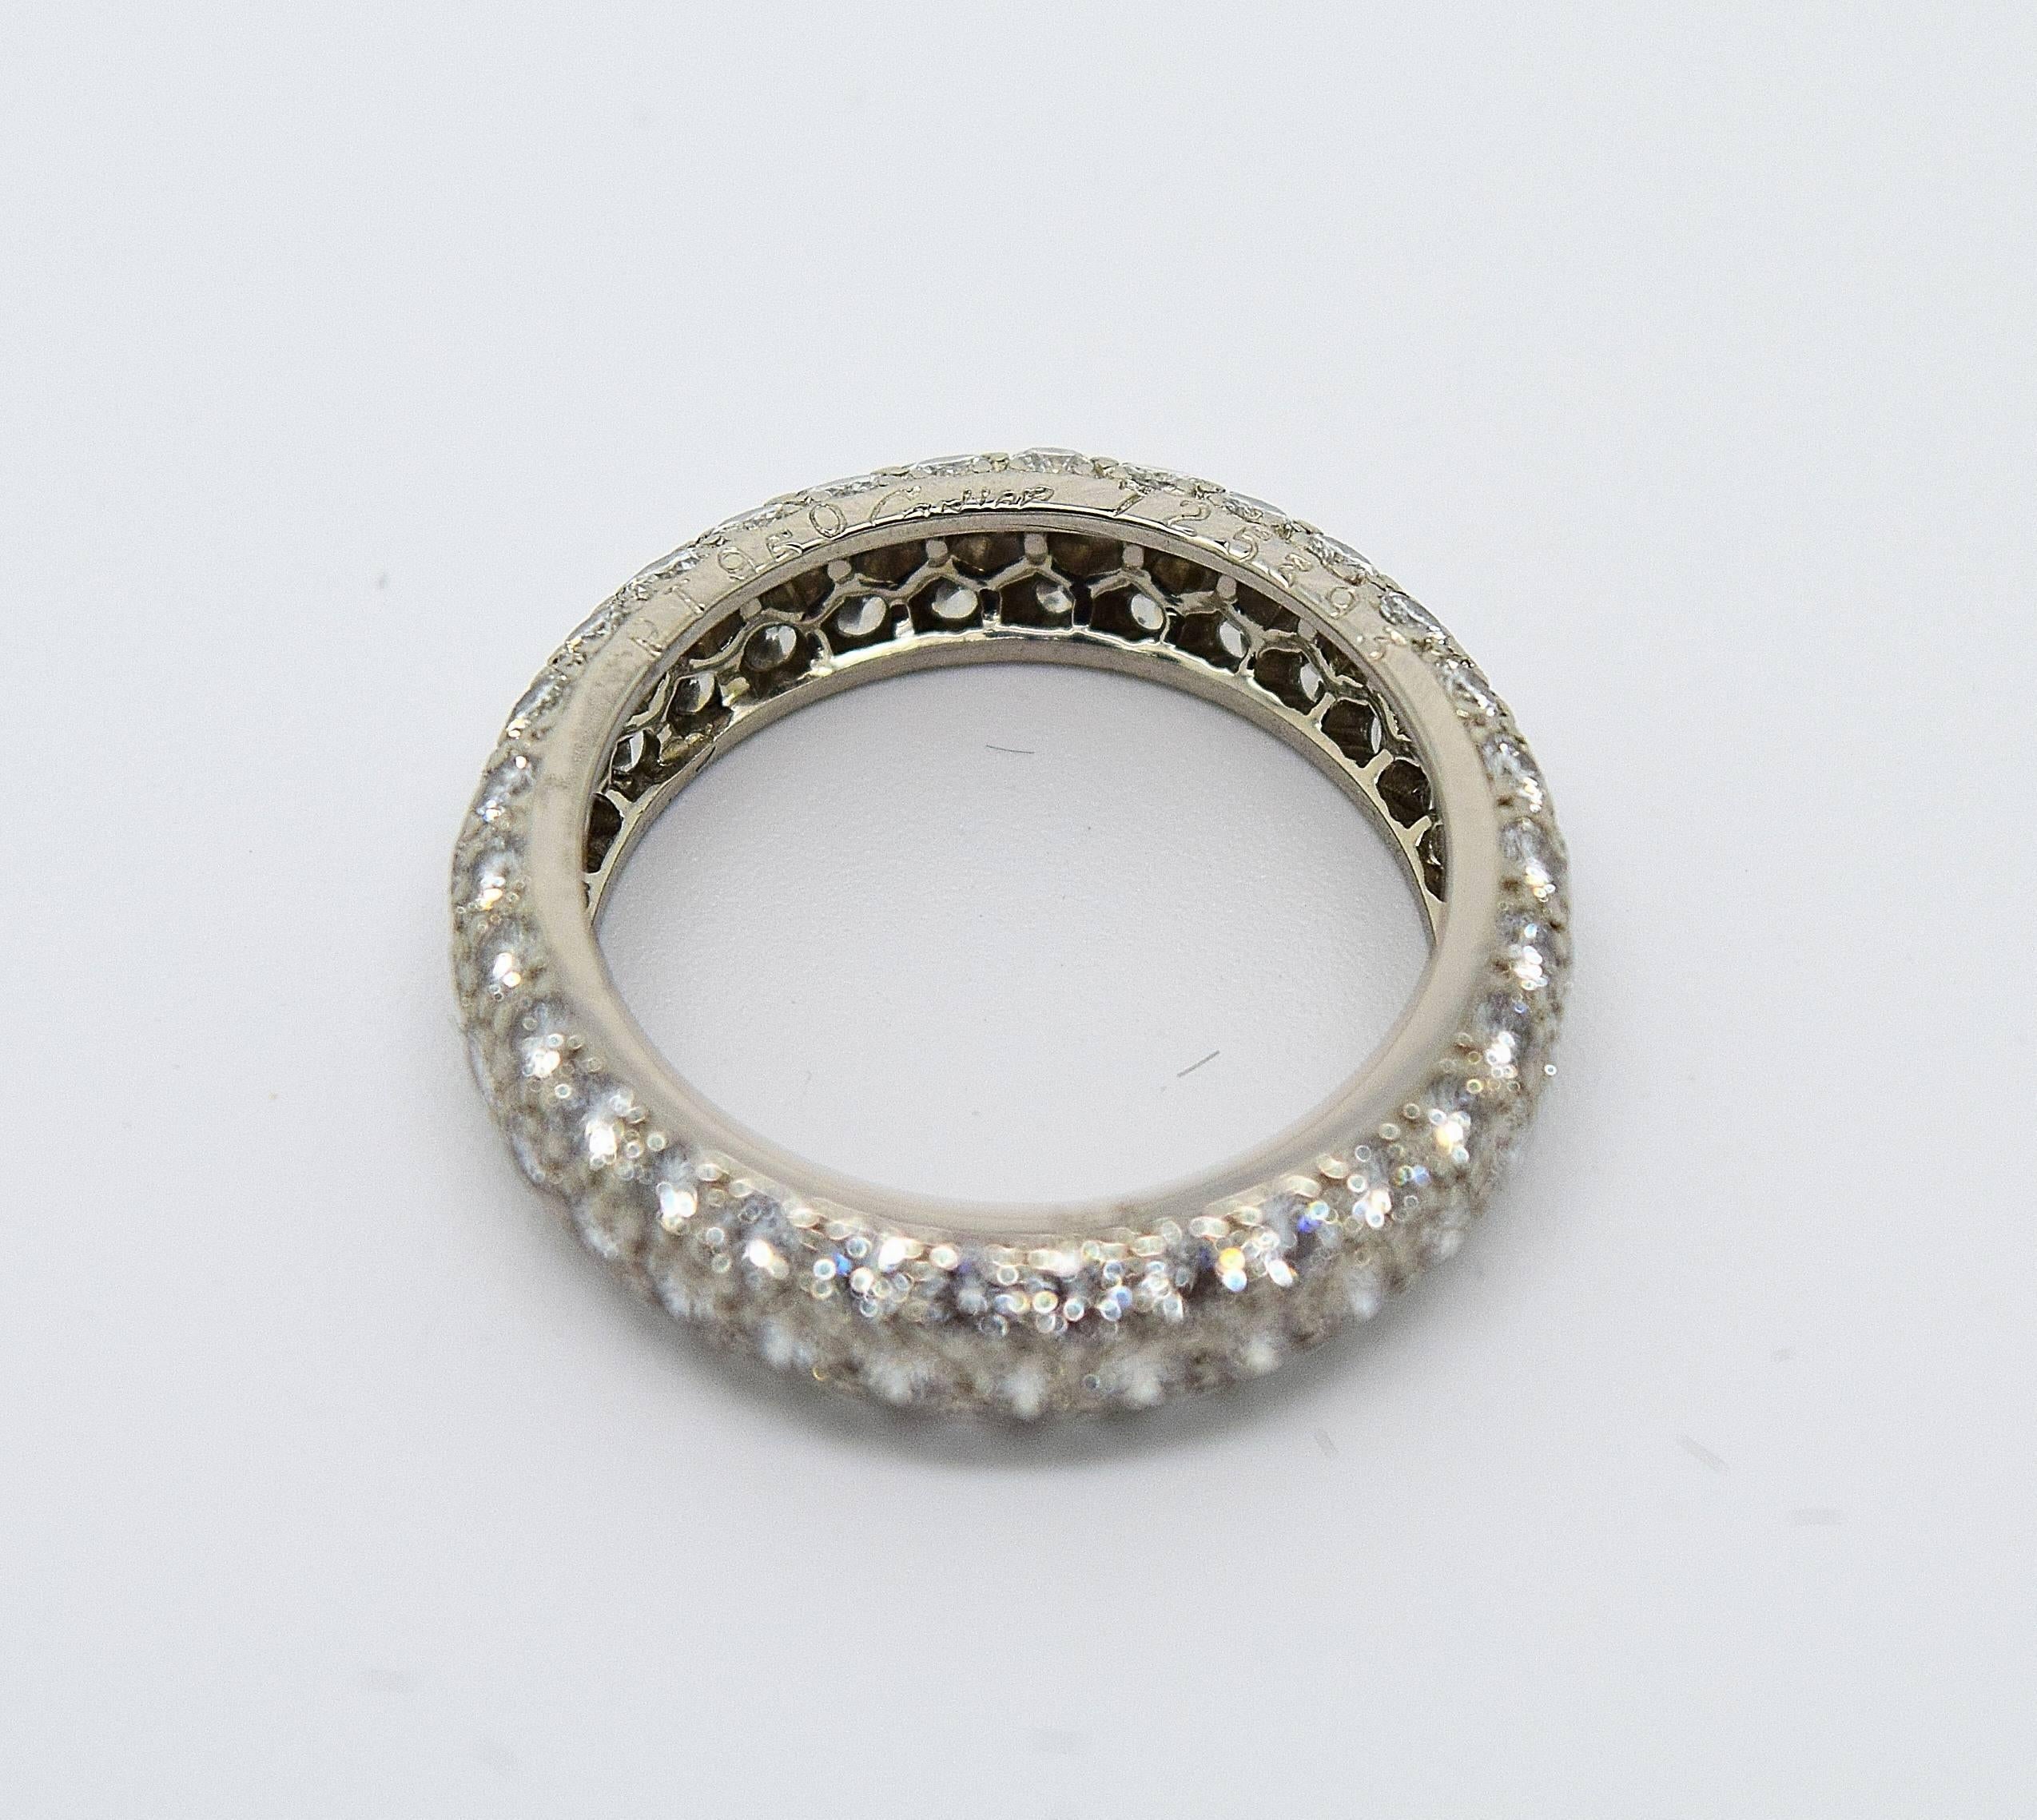 Cartier Paris Pave Diamond Platinum Wedding Band Ring In Good Condition For Sale In Chicago, IL